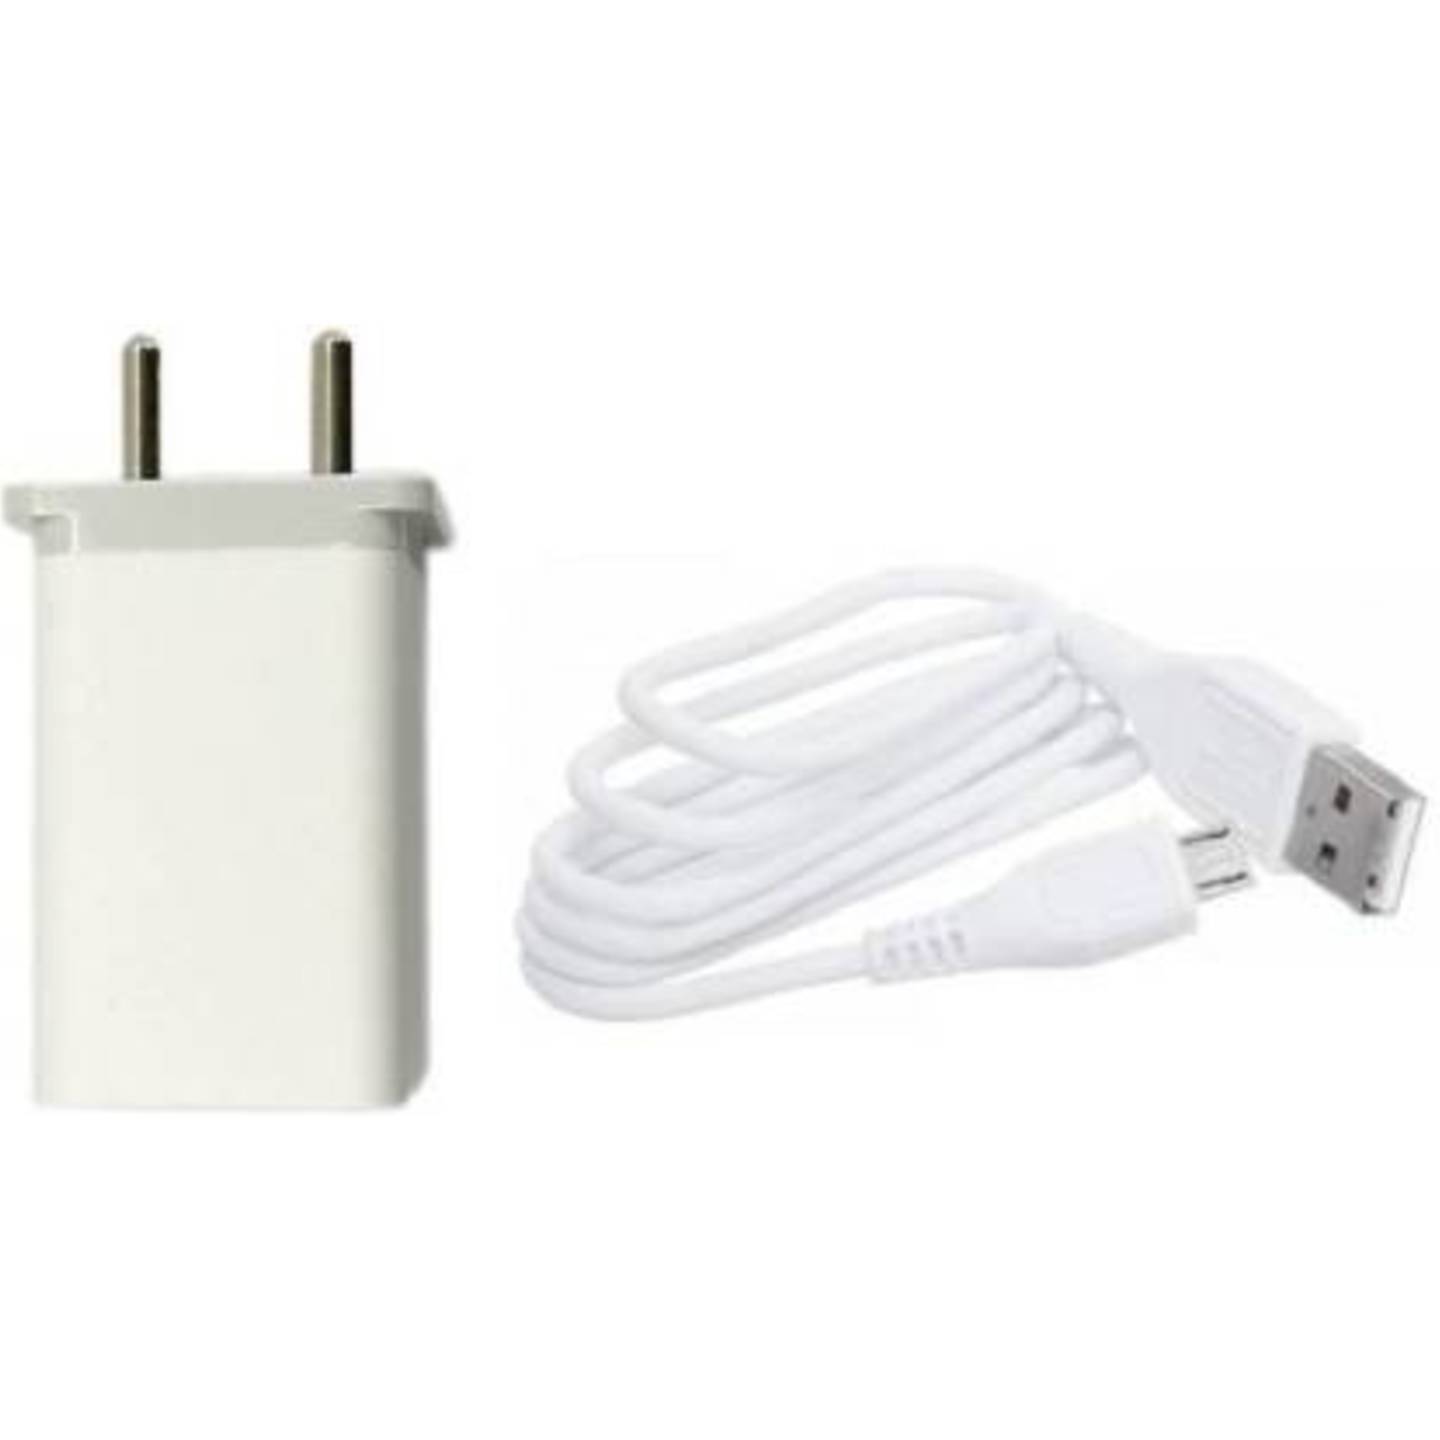 OPPO Wall Charger Accessory Combo for oppo mobile phone charger